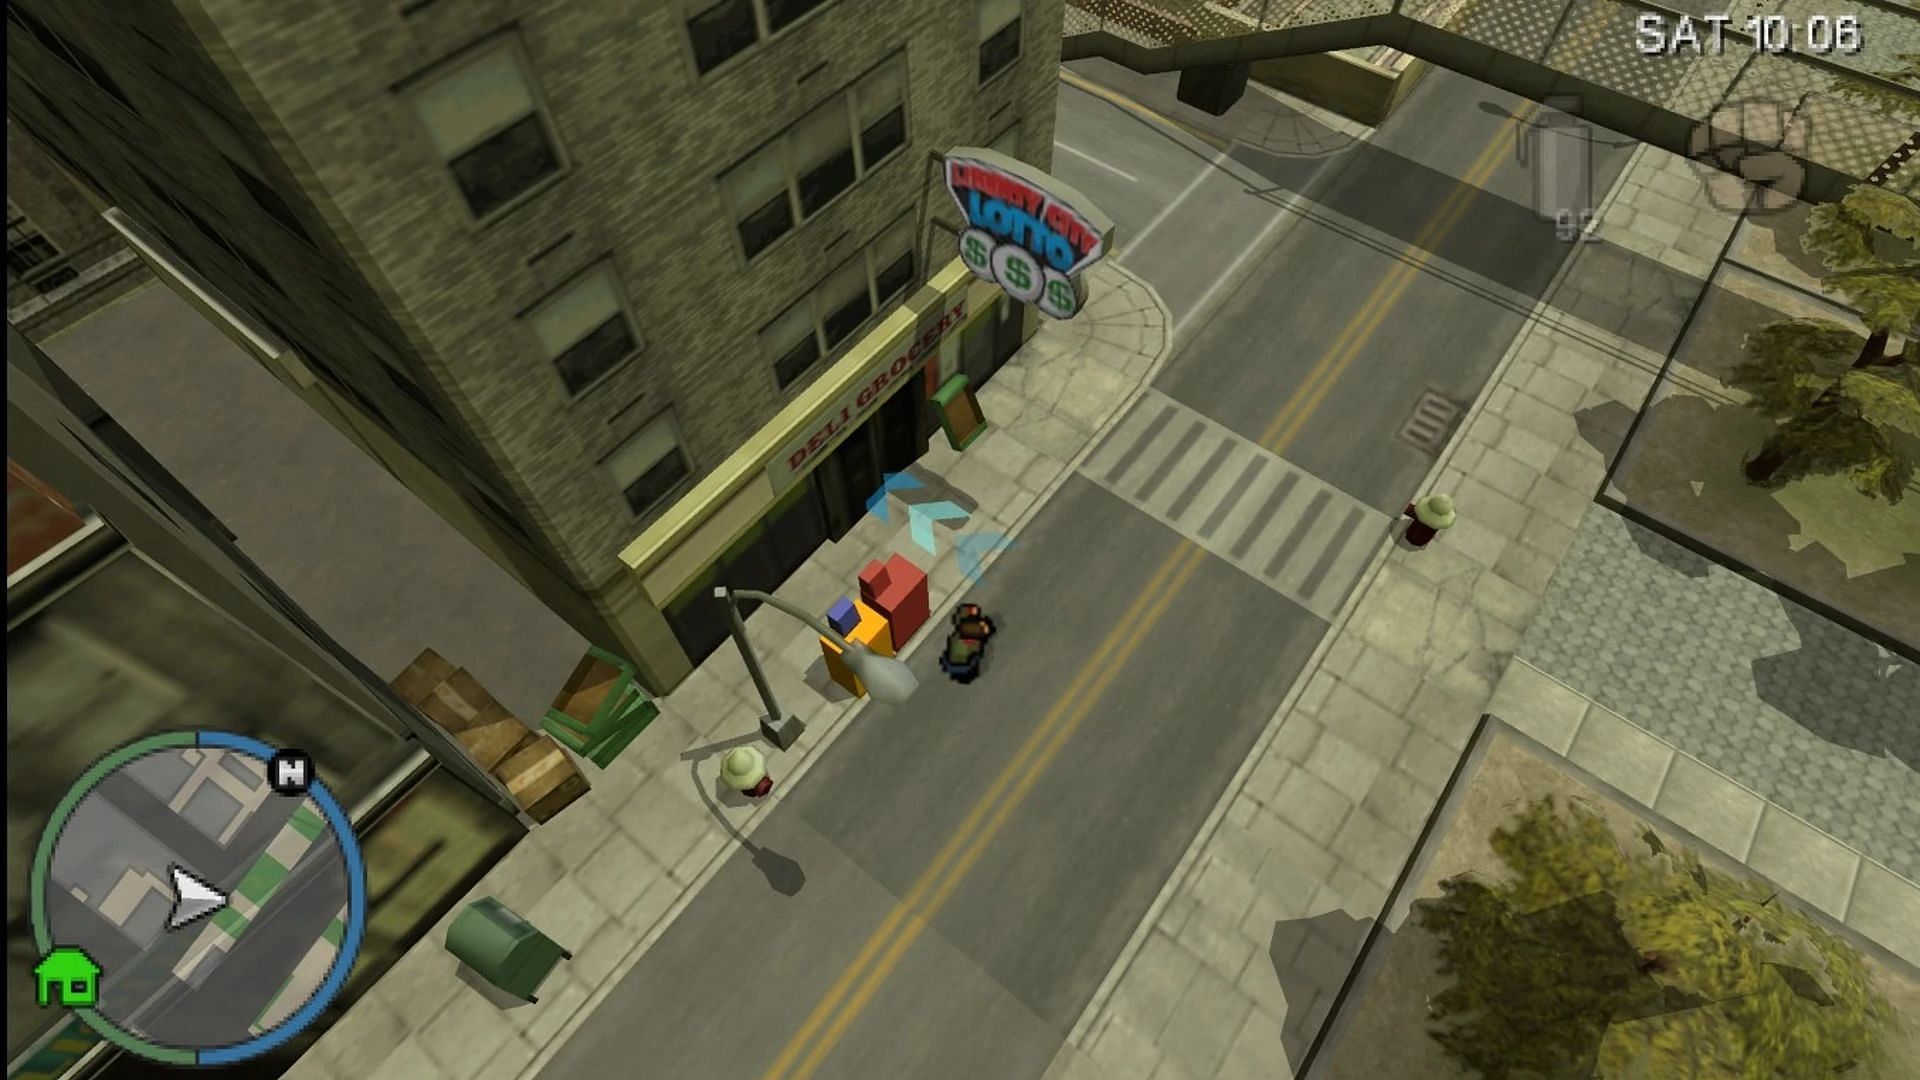 5 unique gameplay features of GTA Chinatown Wars that are missing in the latest games